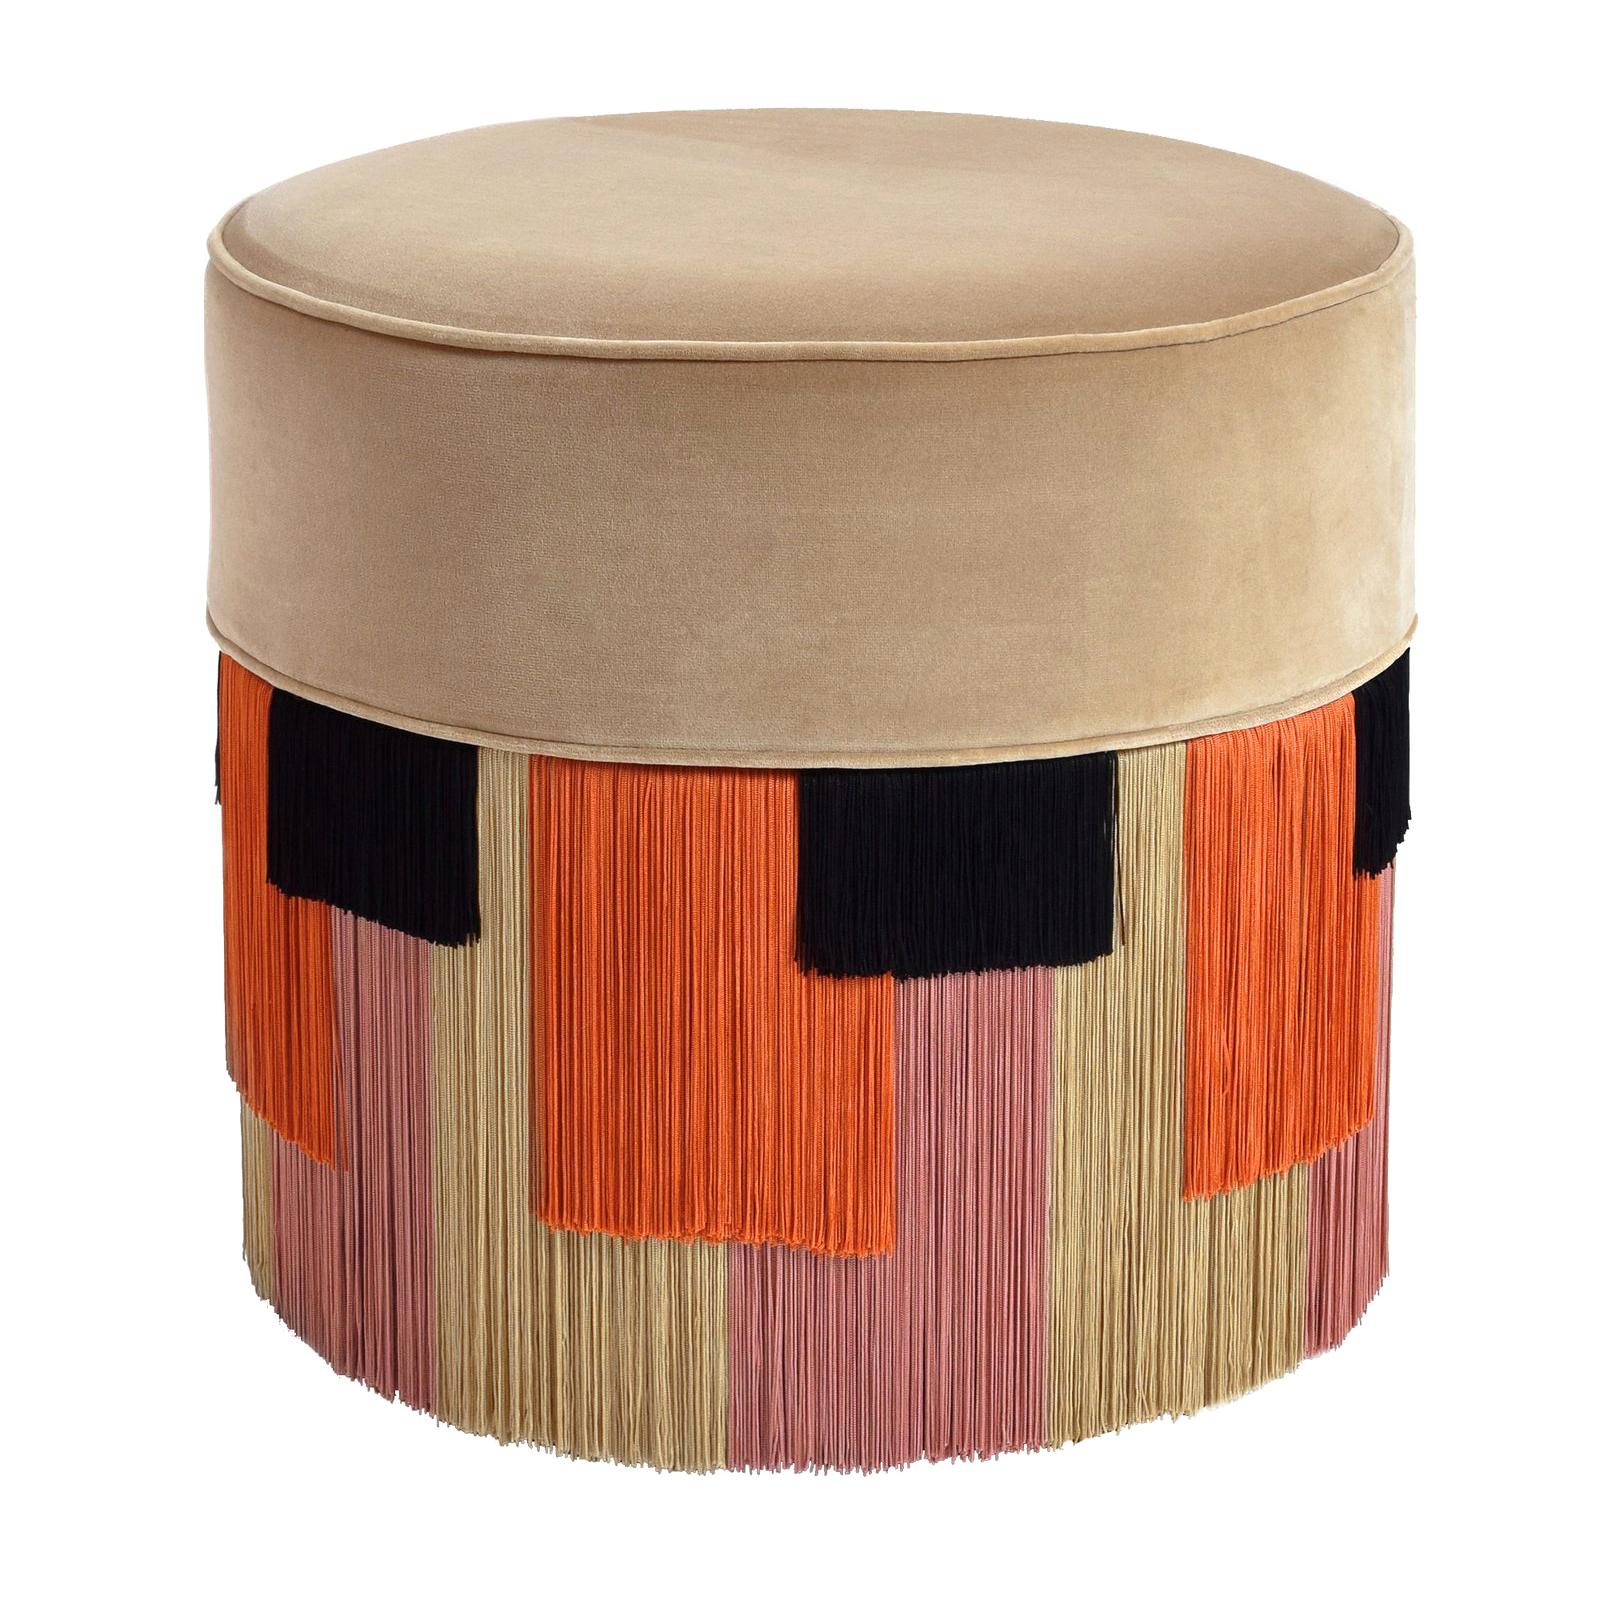 Couture Beige Pouf with Geometric Fringe by Lorenza Bozzoli Design For Sale